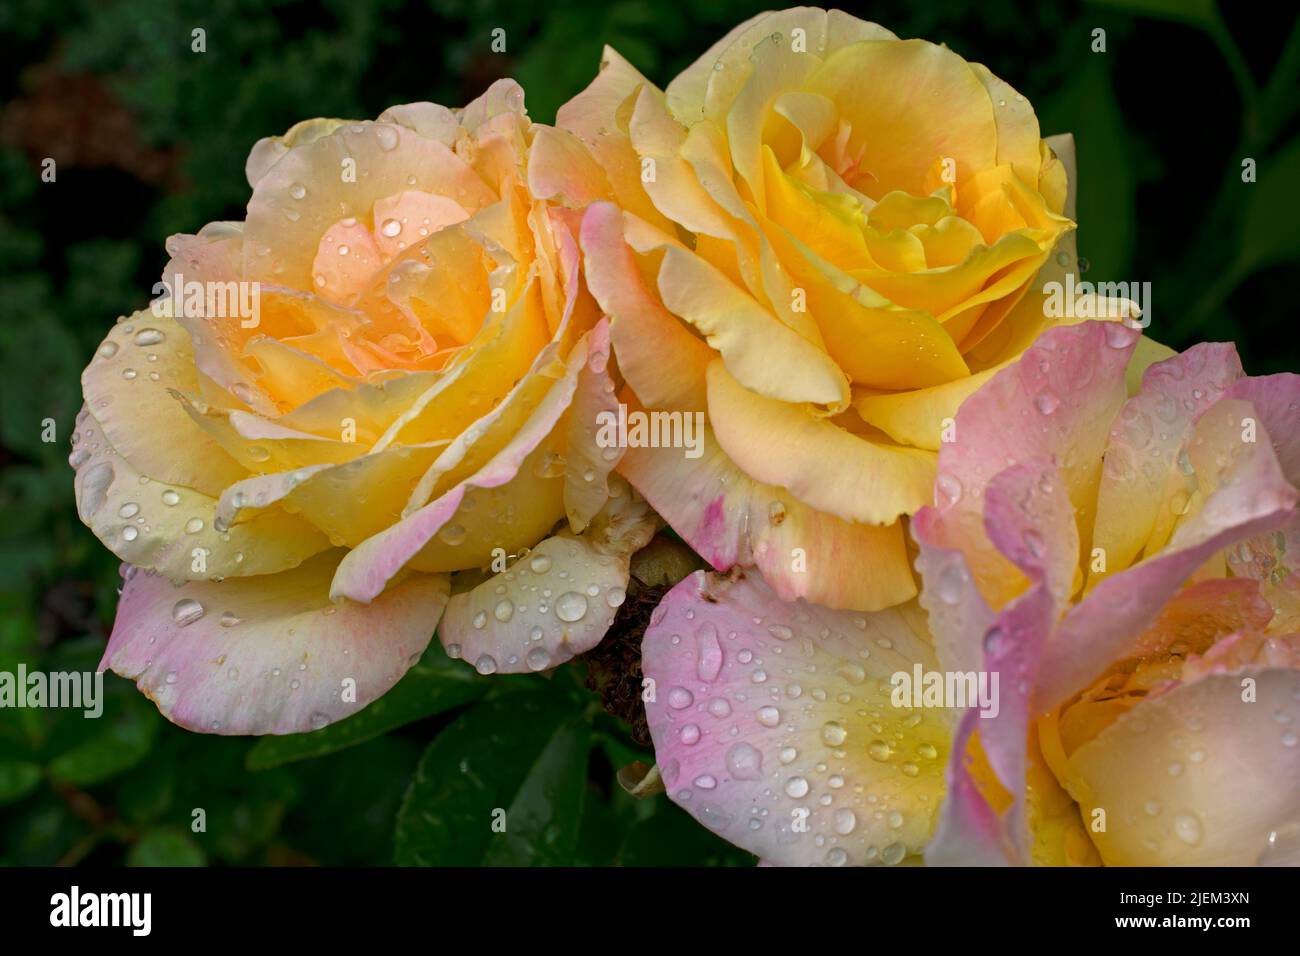 Several, large, pinkish yellow roses on a blurred green background of wet leaves and shrubs -21 Stock Photo